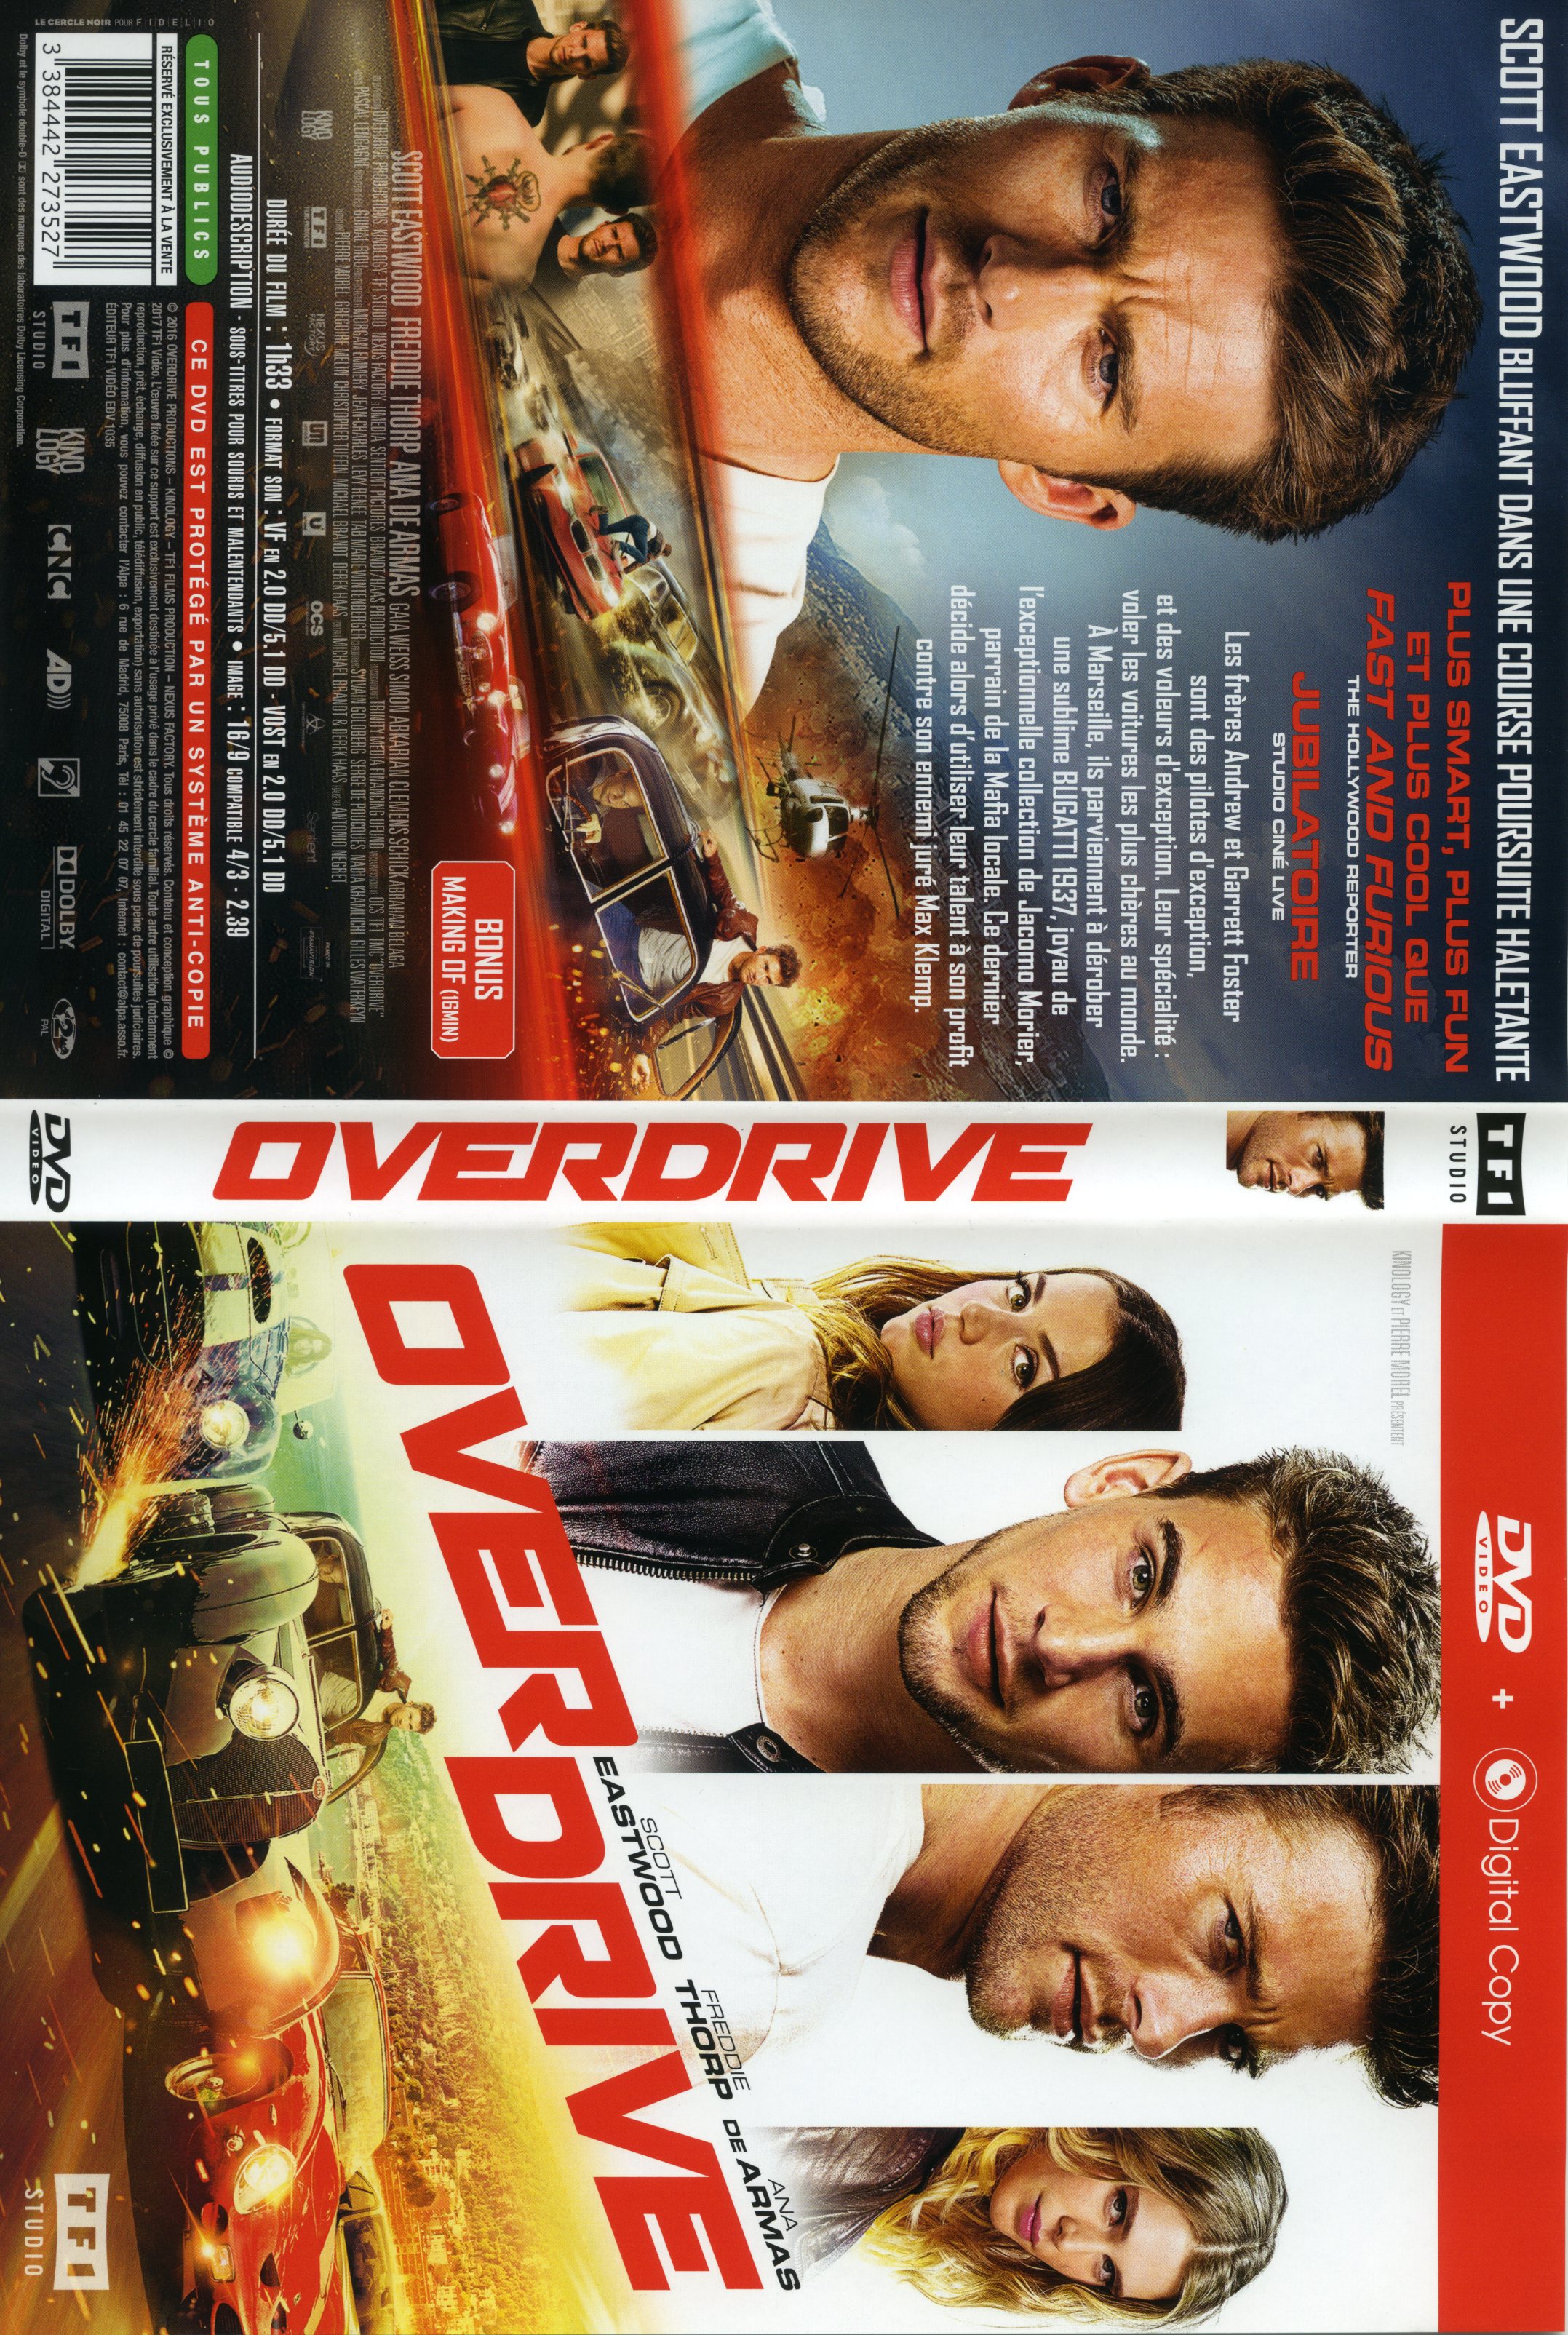 Jaquette DVD Overdrive